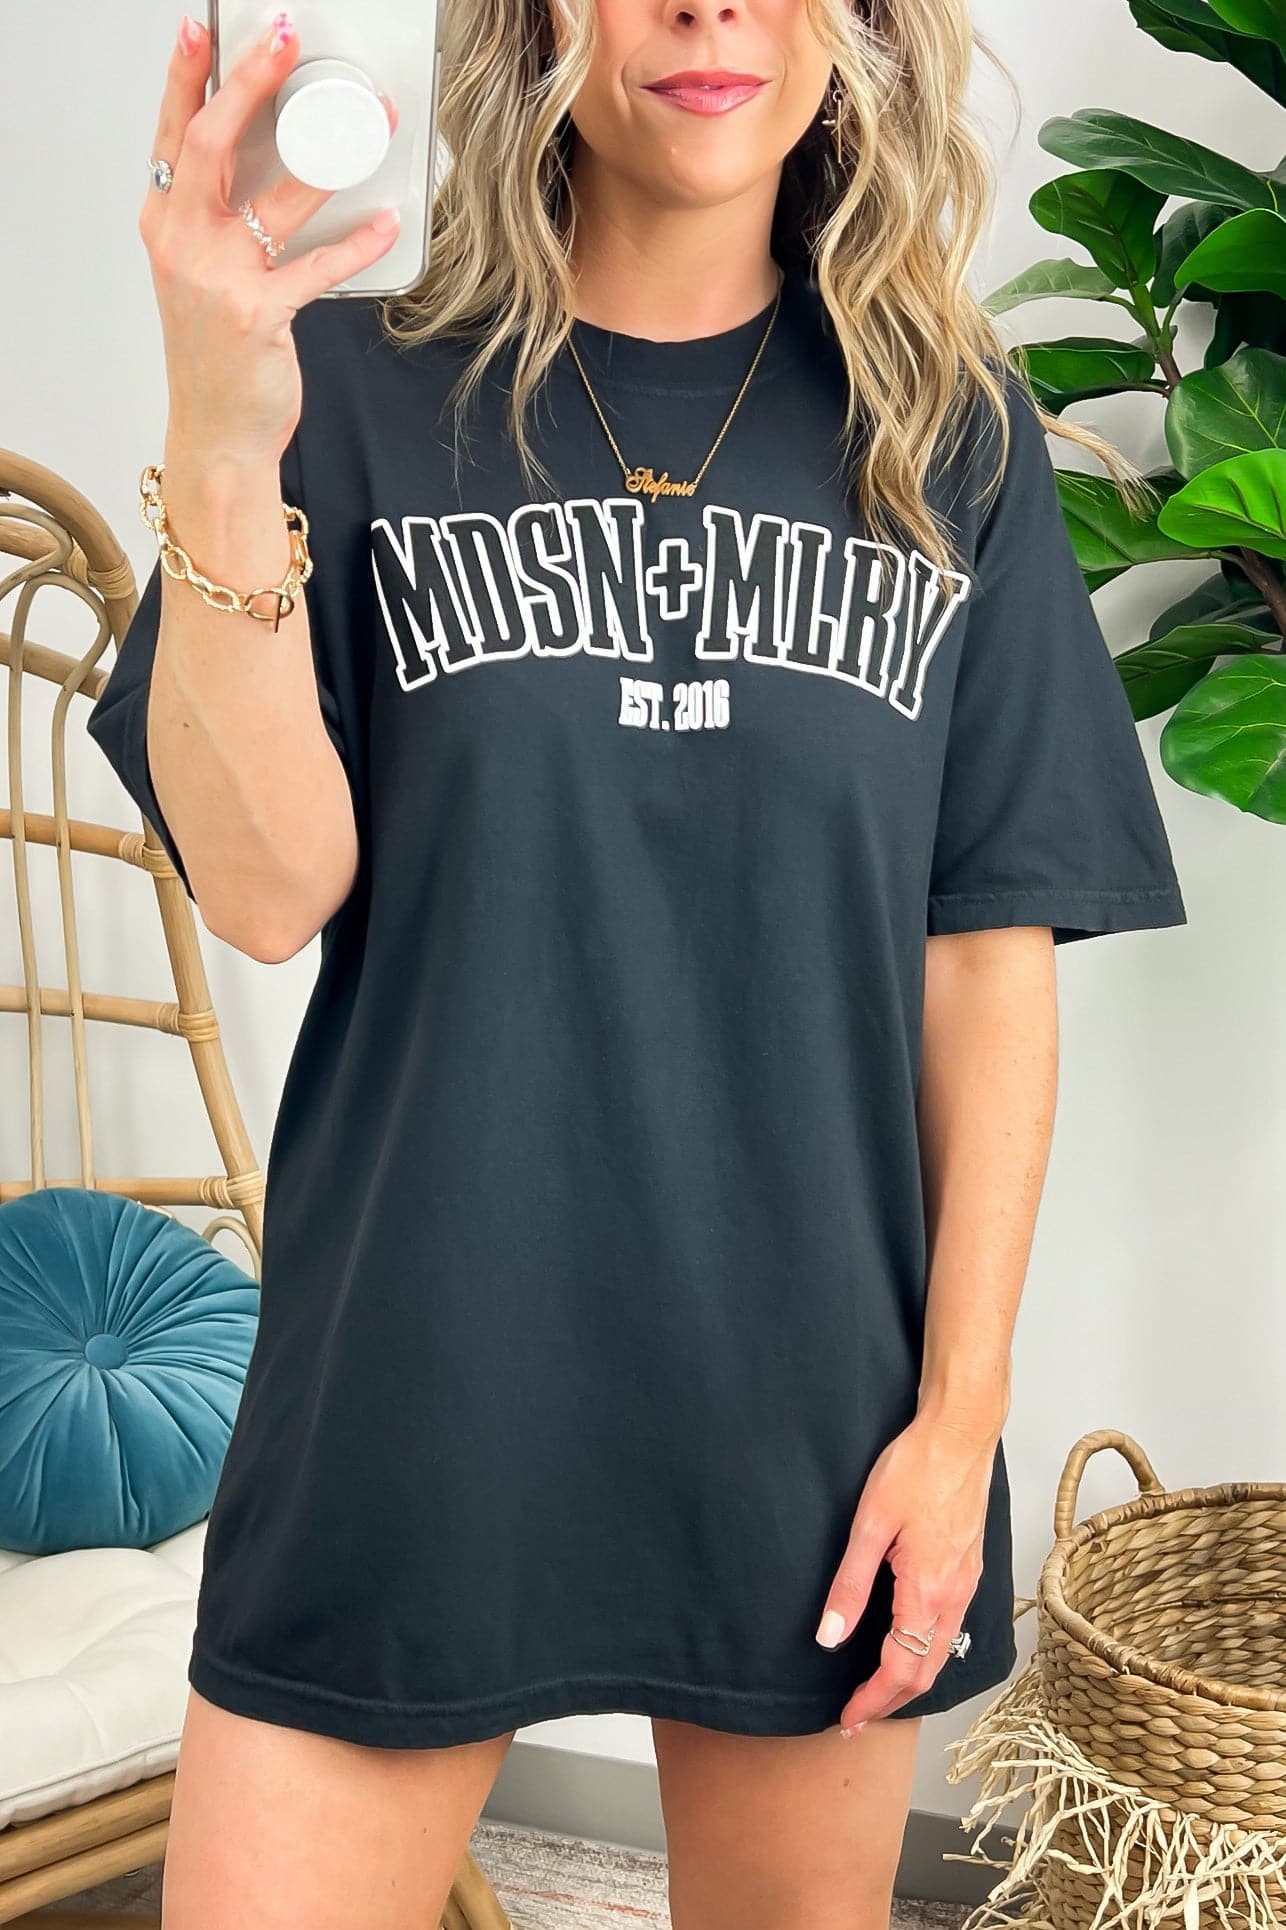  MADISON + MALLORY 2016 Graphic Tee - BACK IN STOCK - Madison and Mallory